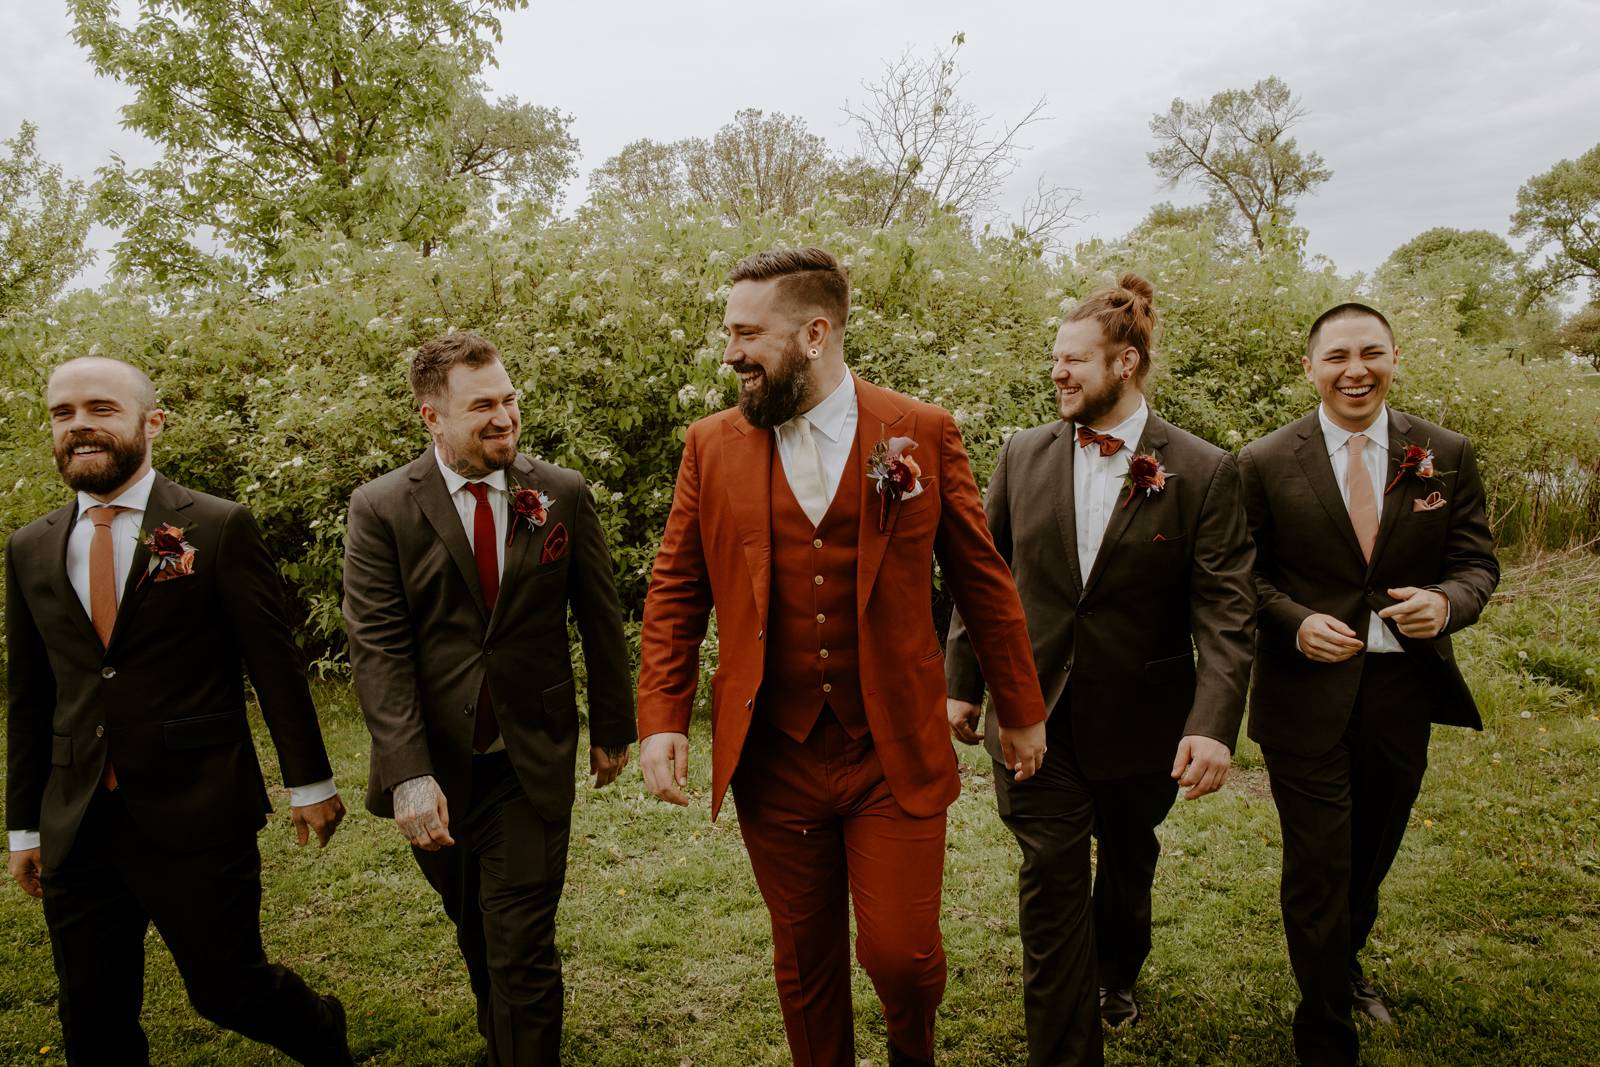 A GUIDE TO CHOOSING YOUR WEDDING PARTY FASHIONS: 9 WEDDING PARTY